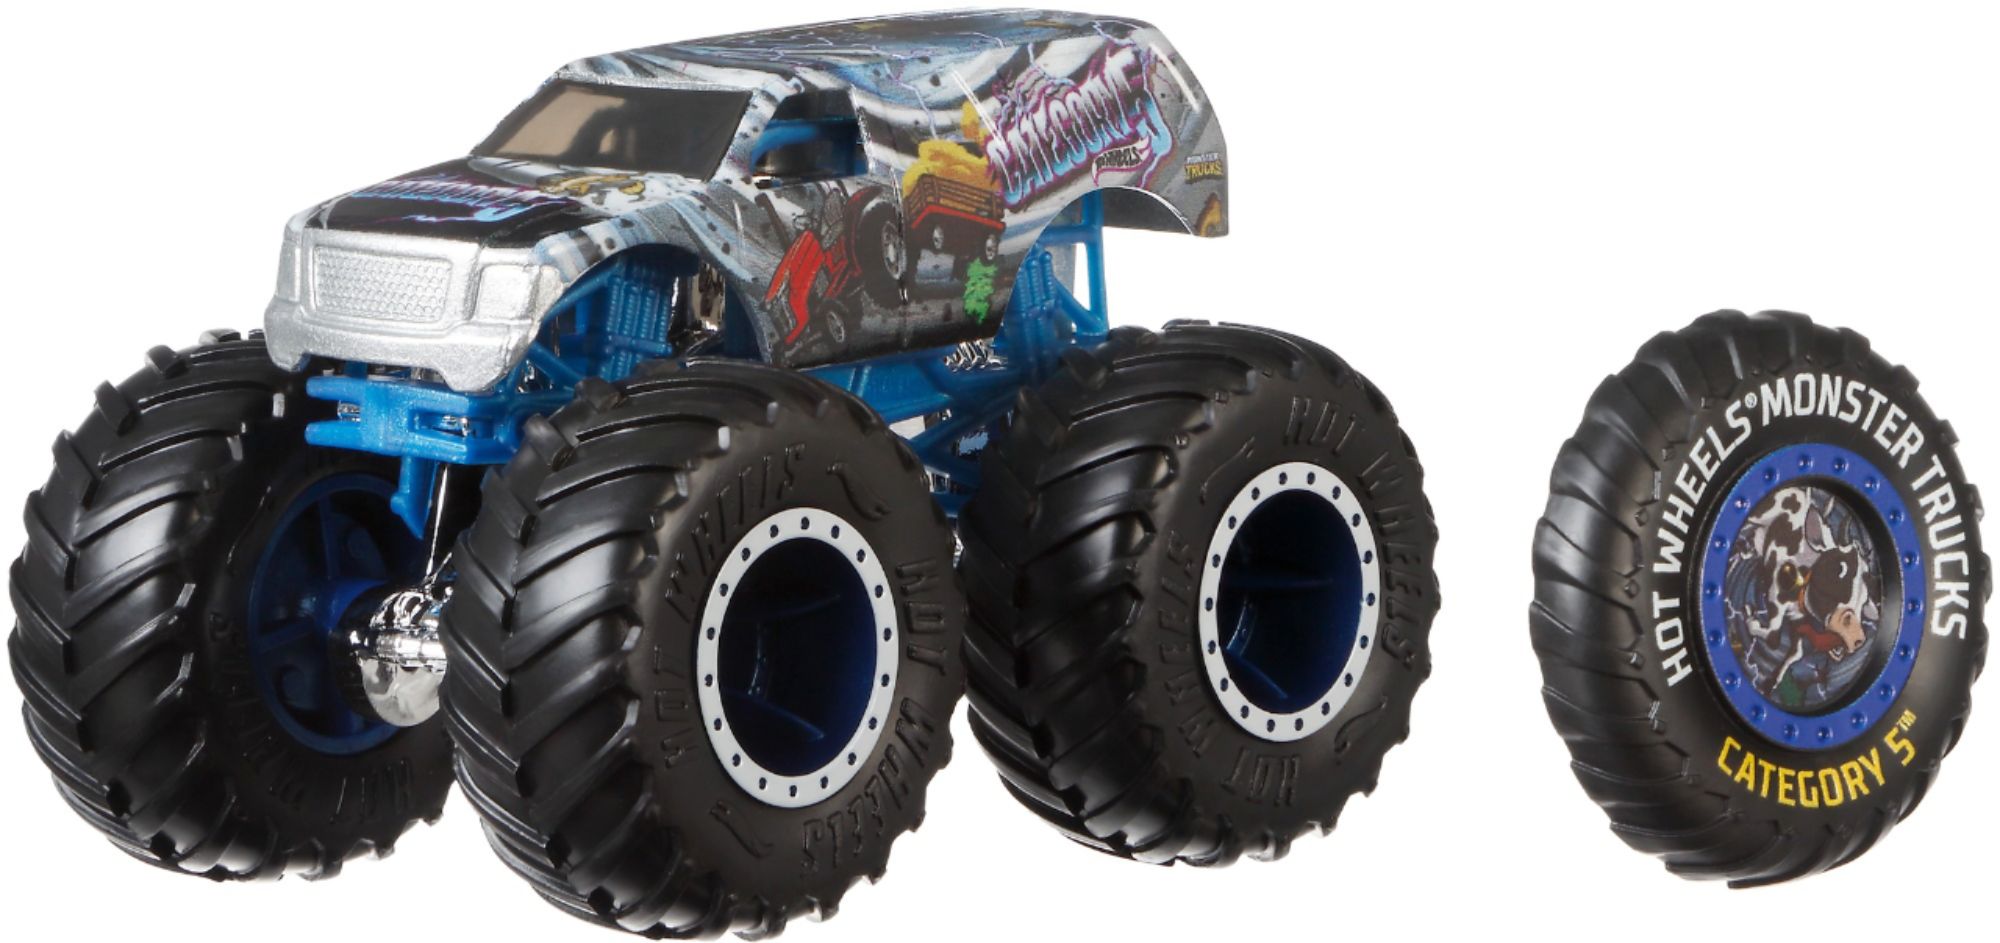 Hot Wheels Monster Trucks Collection Styles May Vary FYJ44 - Best Buy